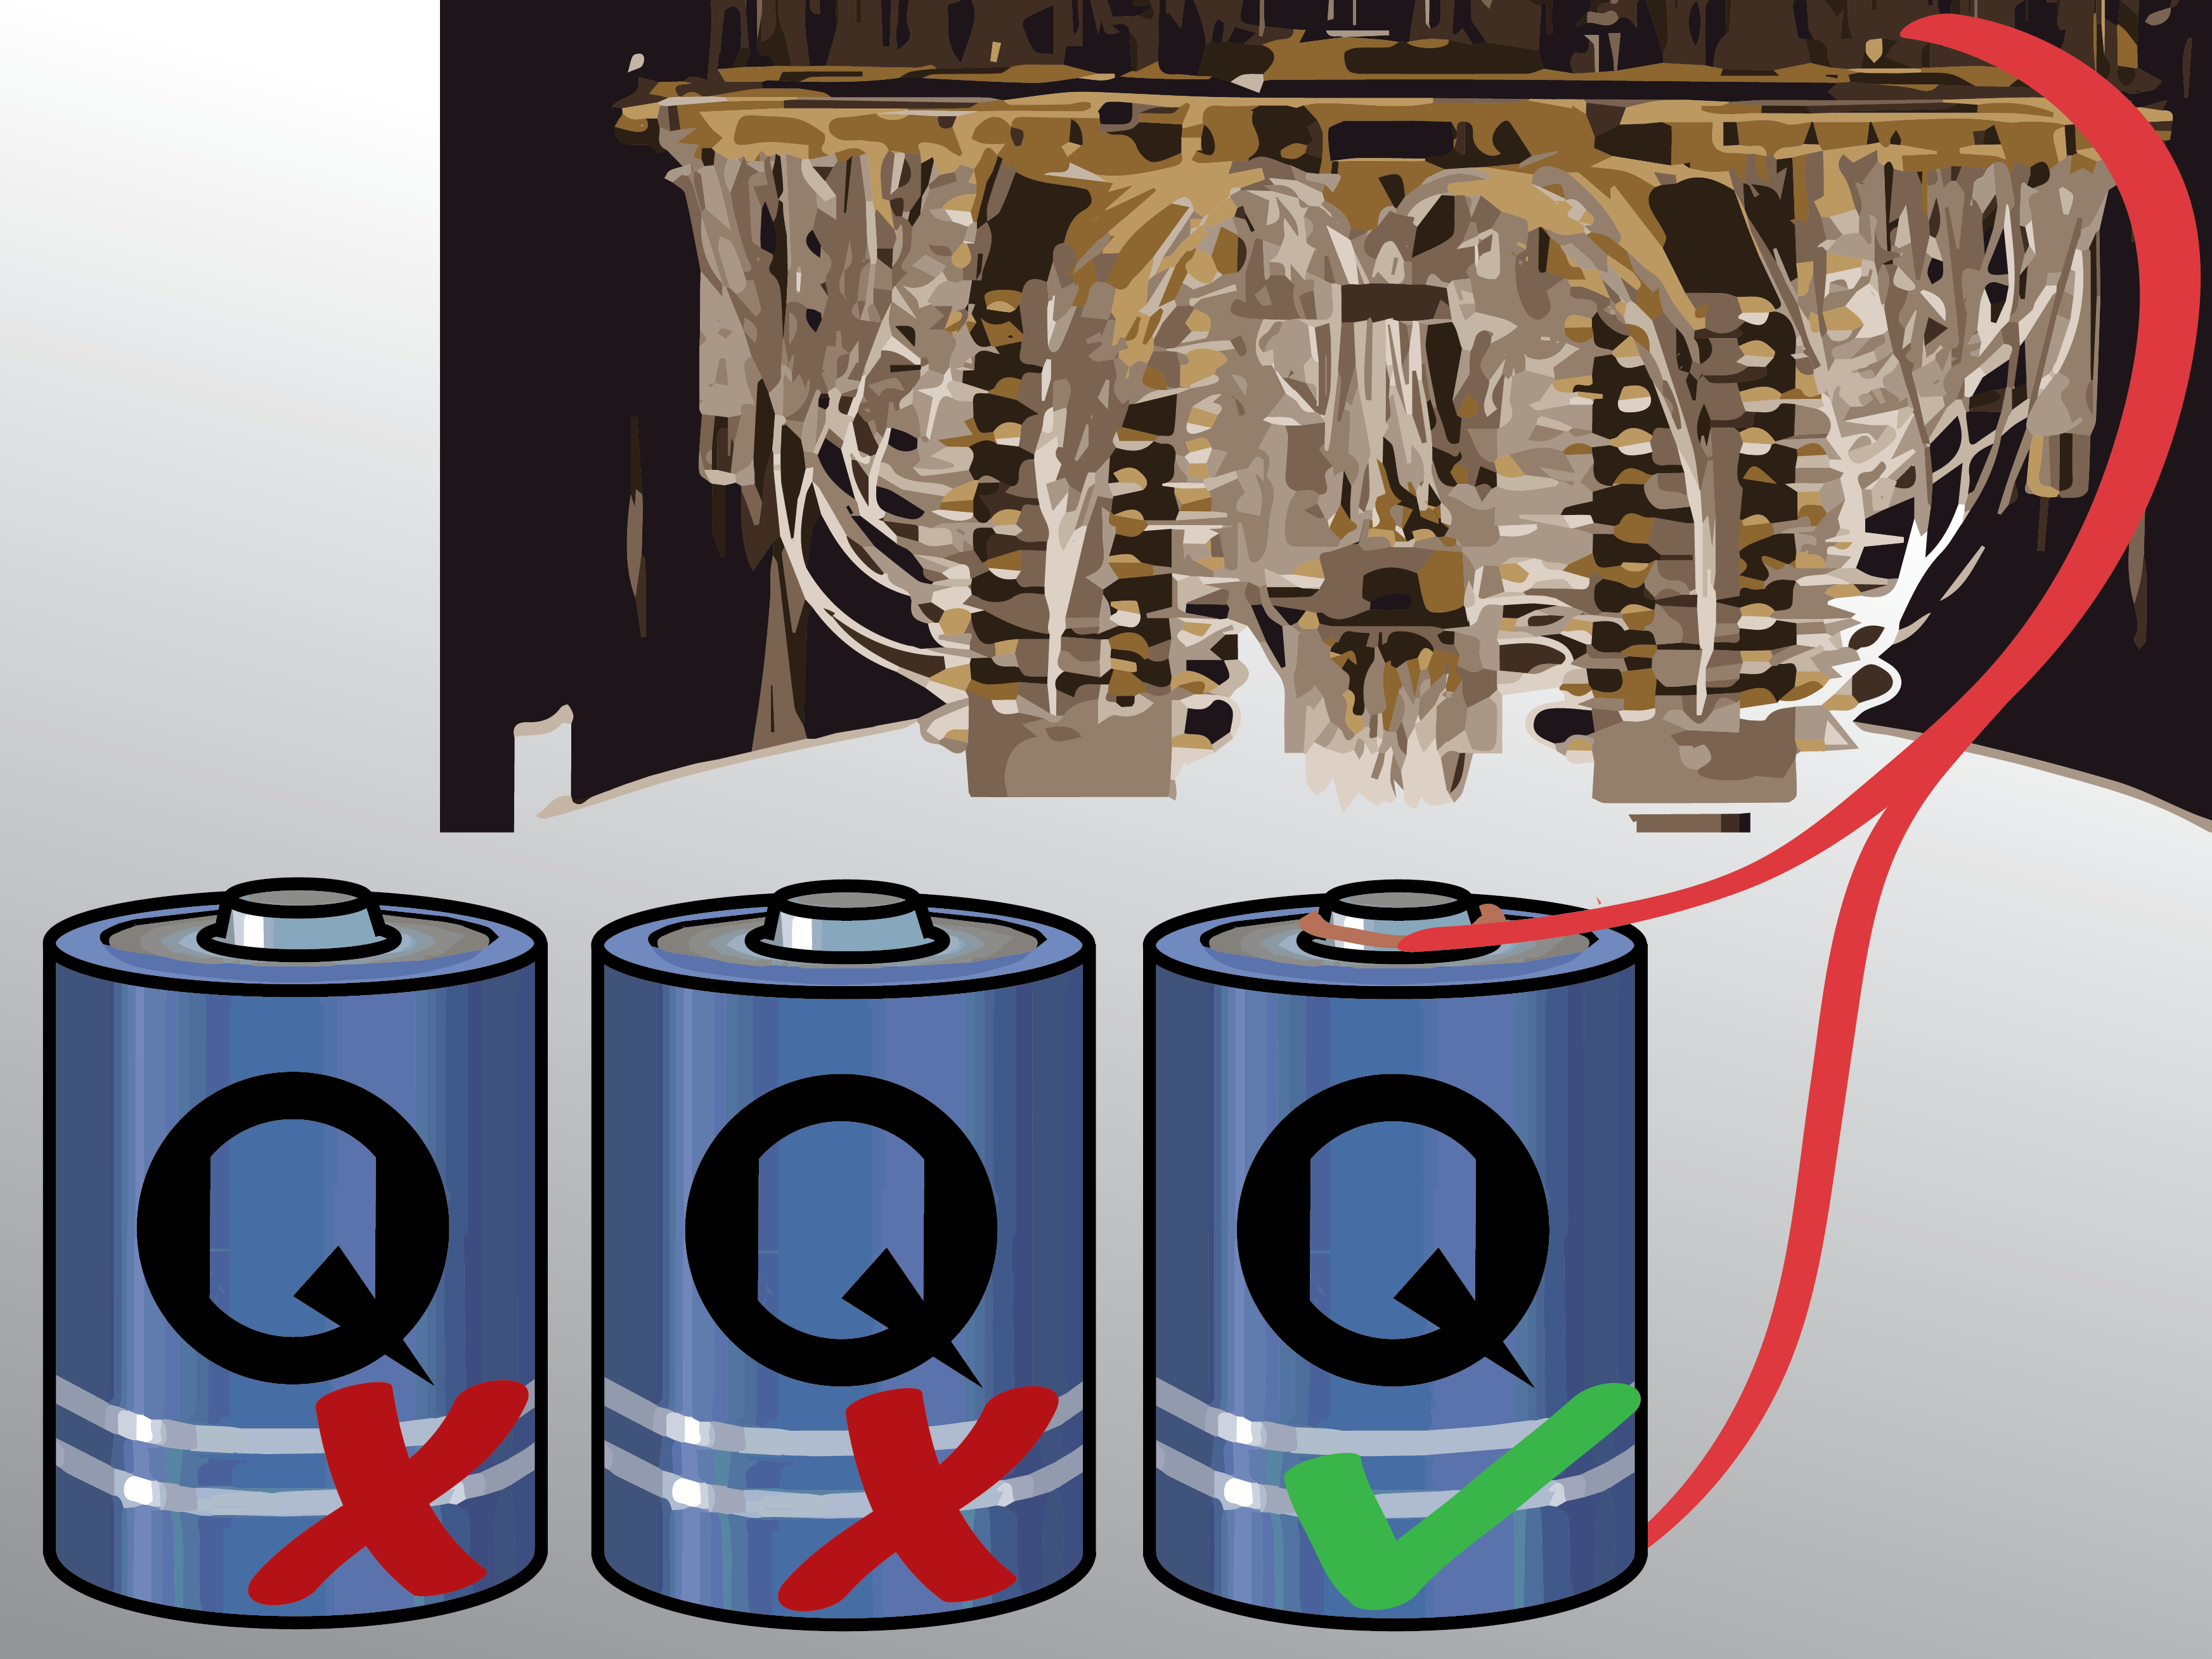 New tool to guide efficient energy extraction from quantum sources